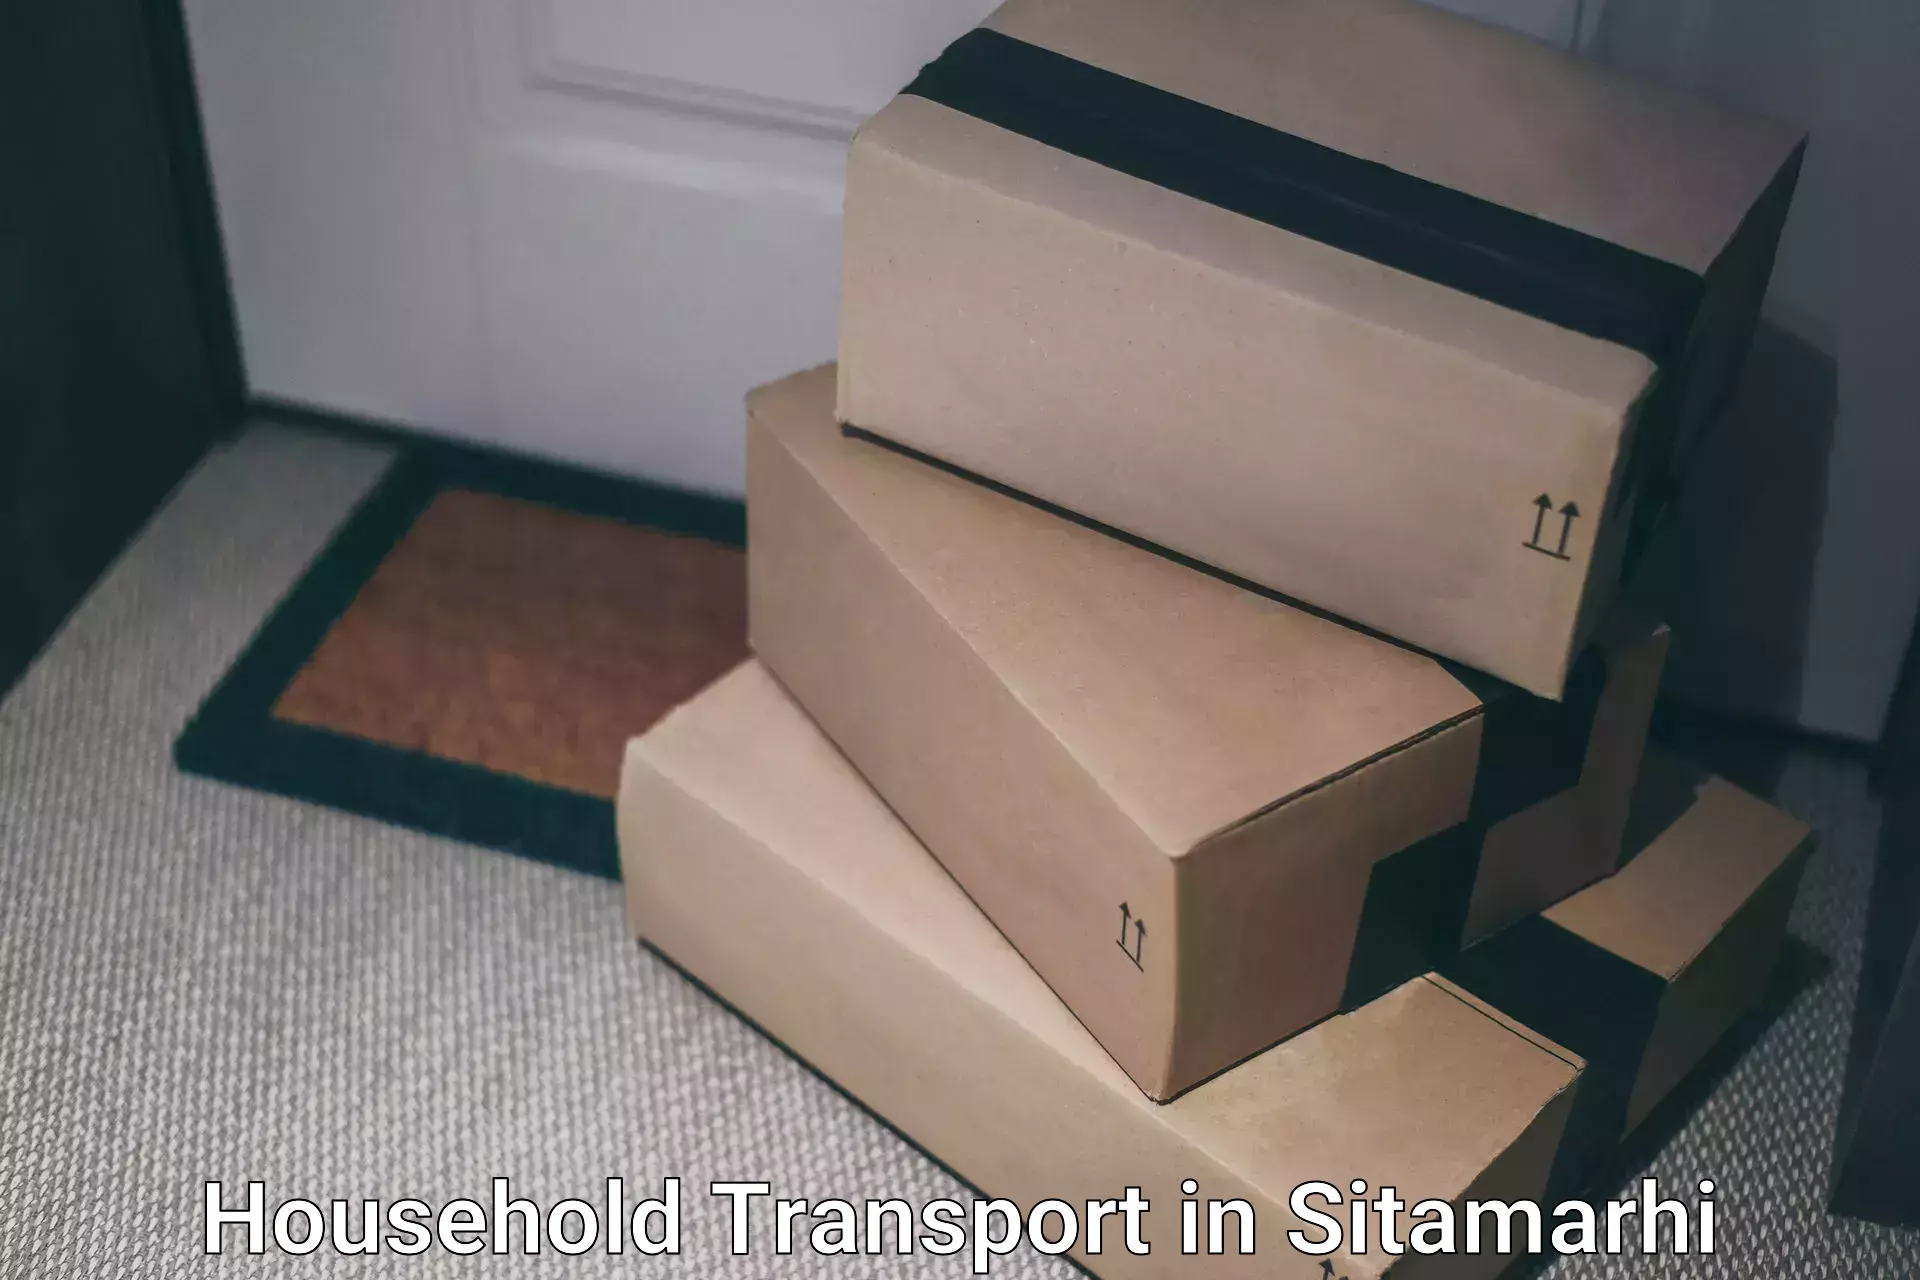 Quality relocation assistance in Sitamarhi